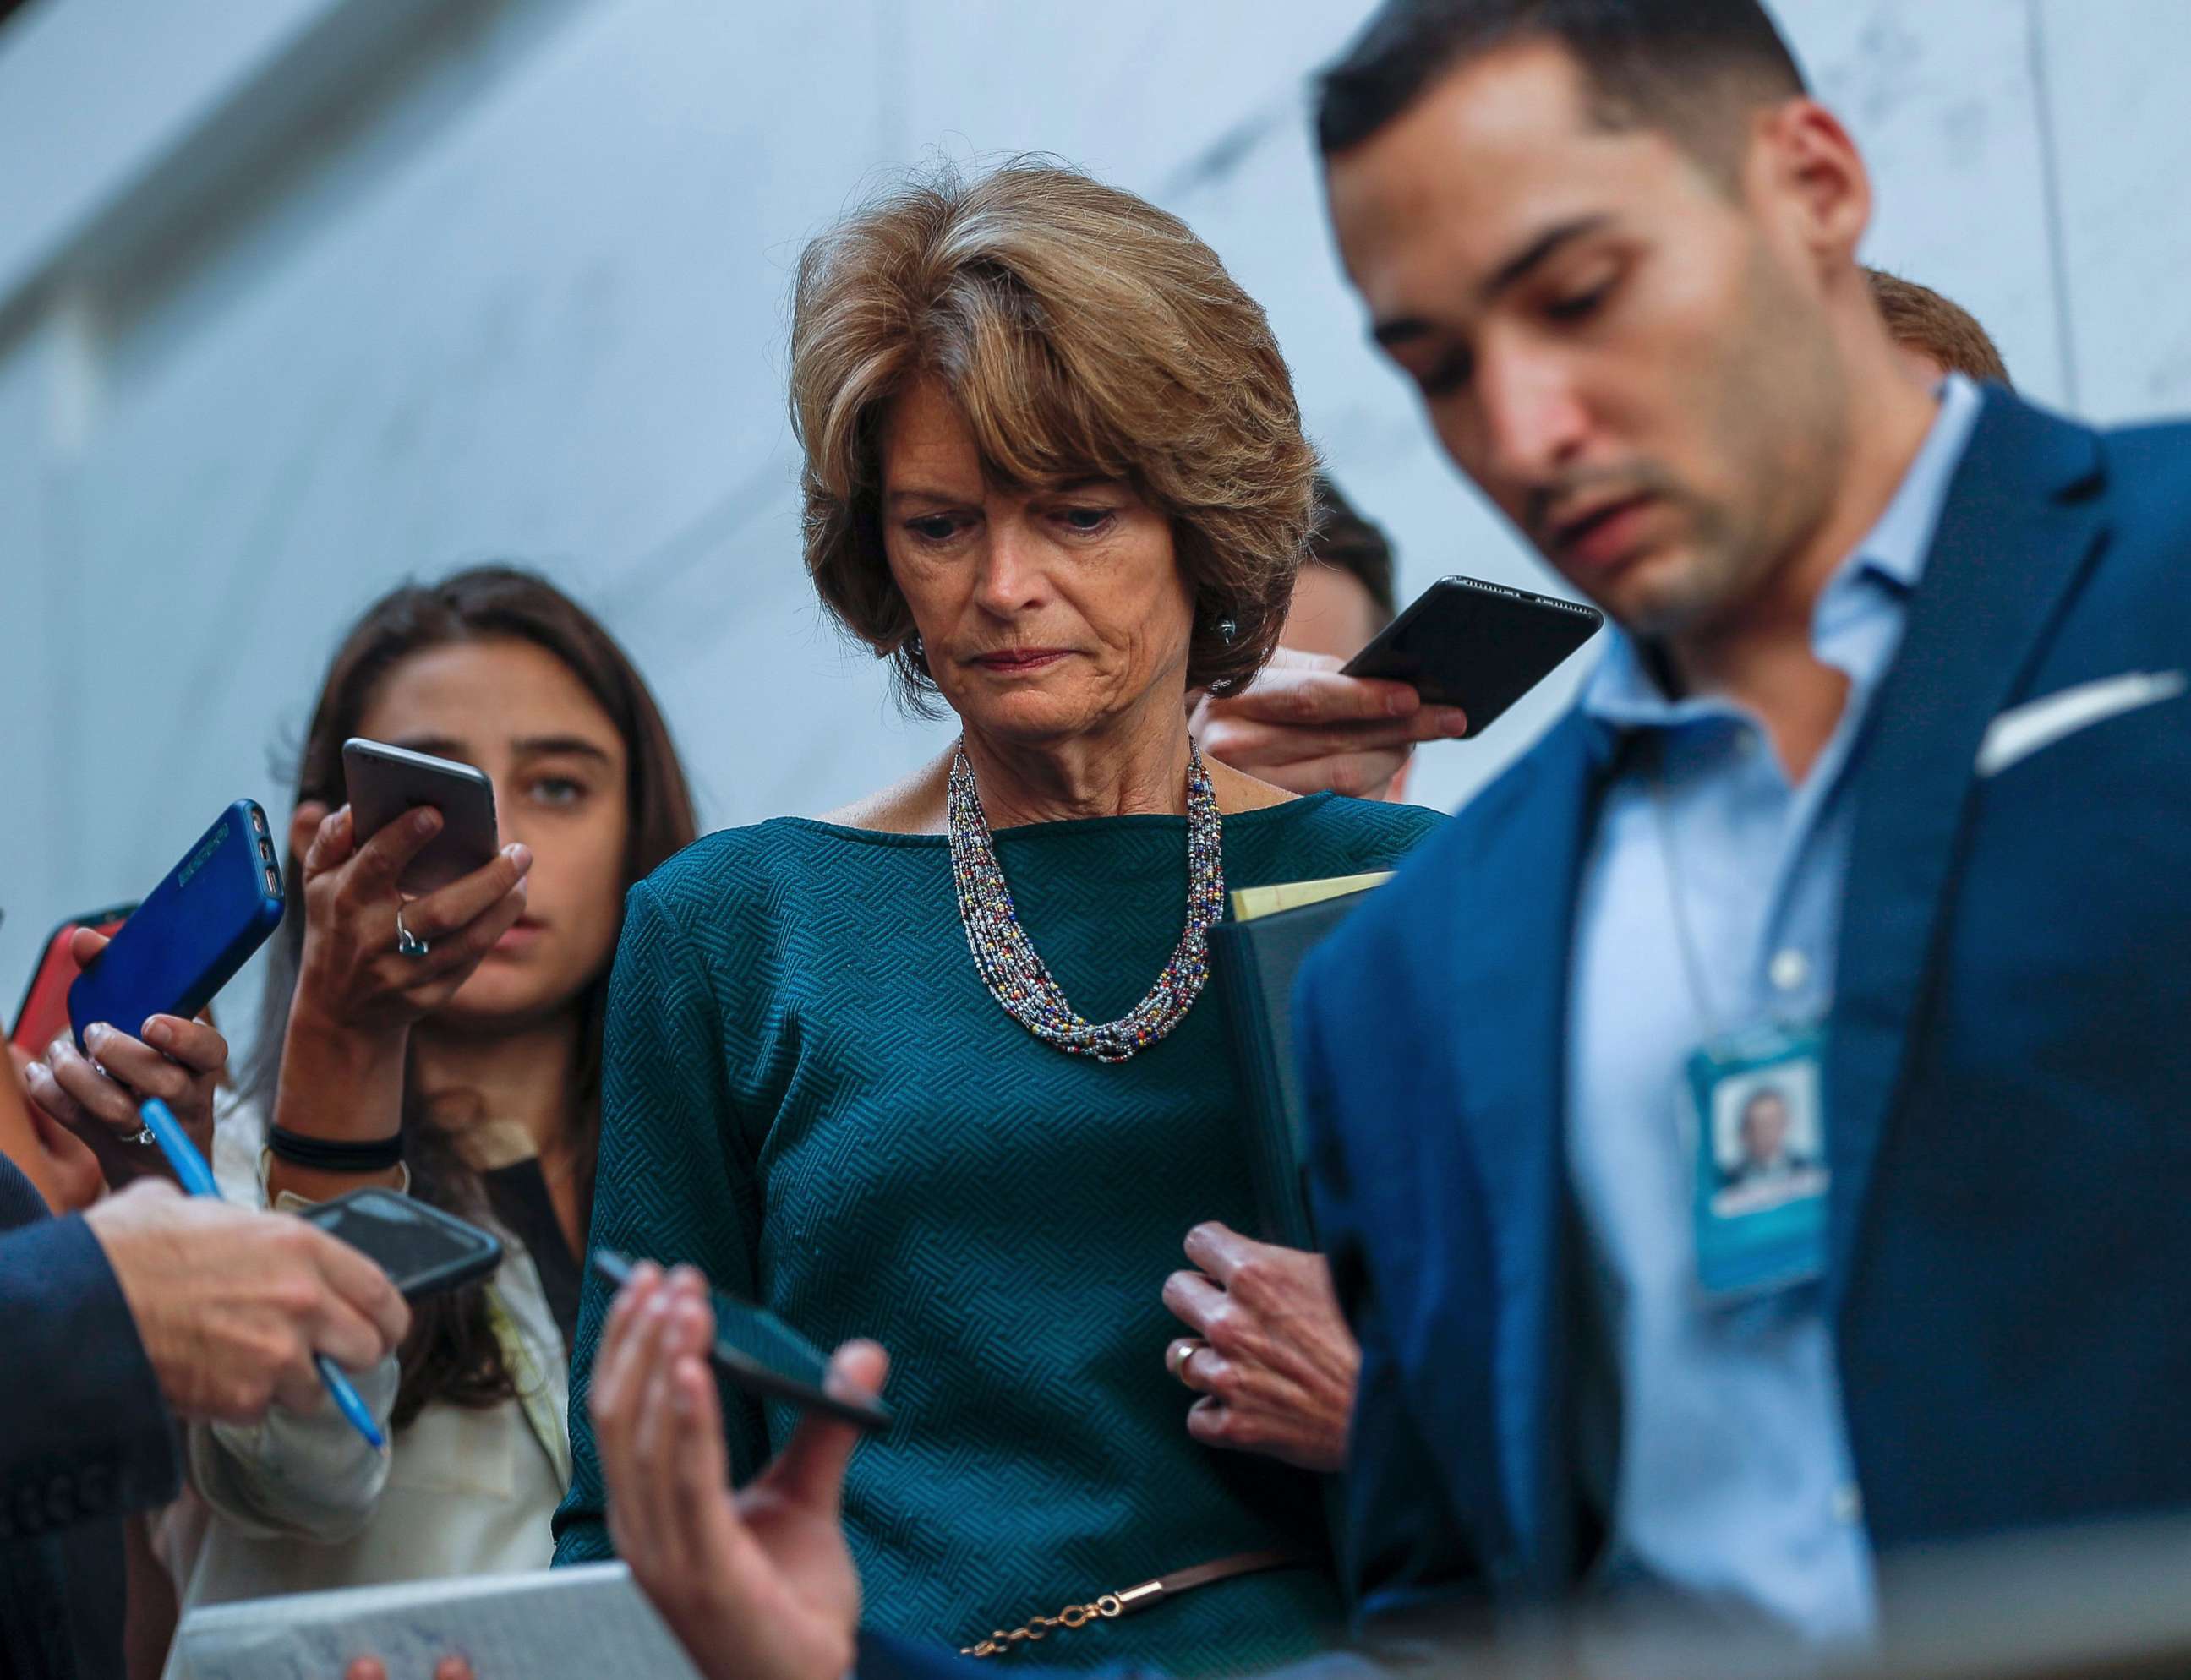 PHOTO: Republican Senator Lisa Murkowski from Alaska is surrounded by the media before viewing documents in the Senate Sensitive Compartmented Information Facility, or SCIF, in the US Capitol in Washington, Oct. 4, 2018. 